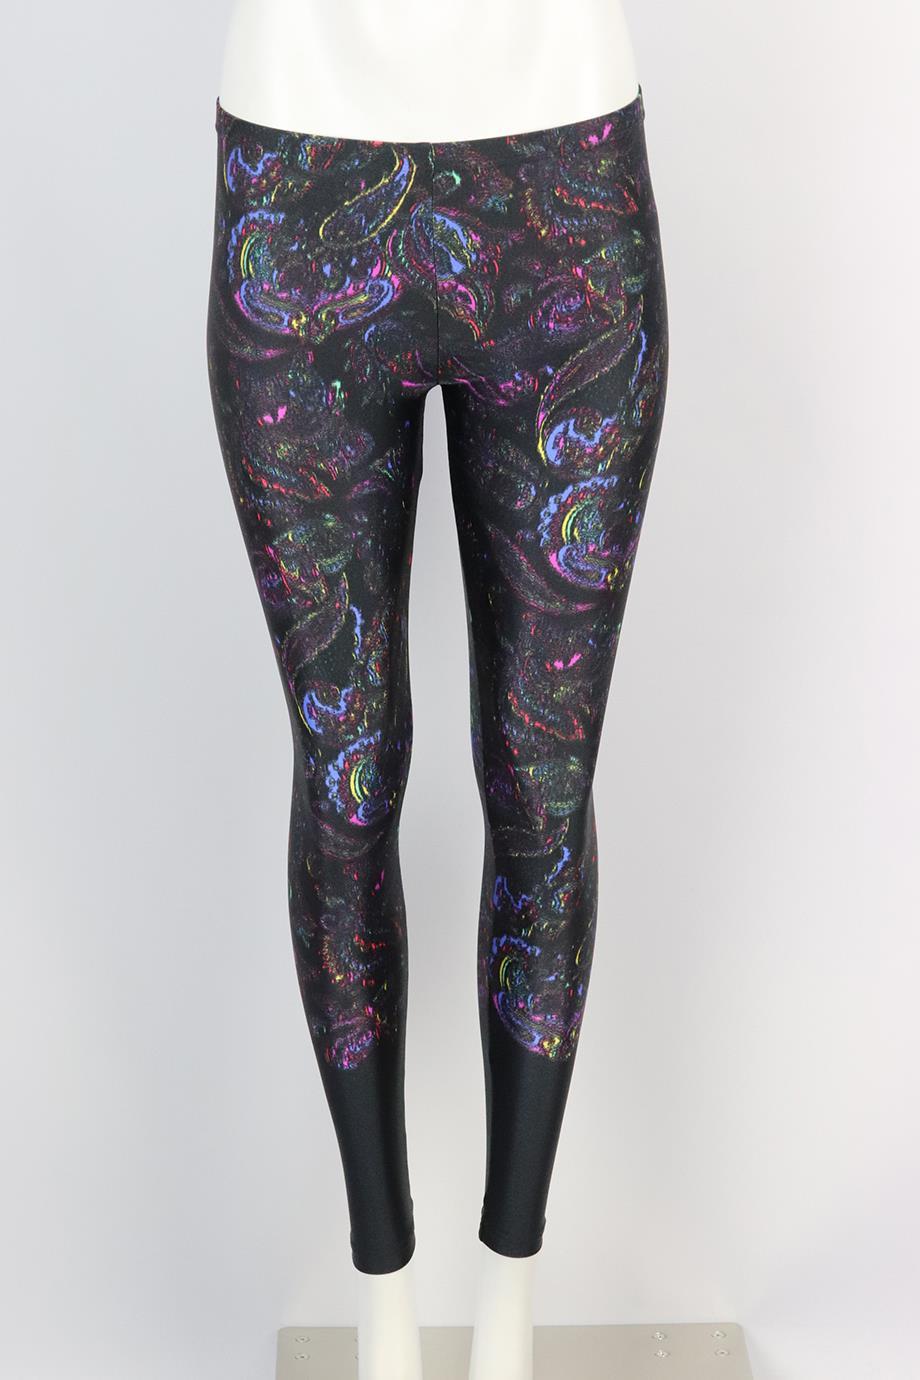 Louis Vuitton printed stretch jersey leggings. Multicoloured. Pull on. 80% Polyamide, 20% elastane. FR 34 (UK 6, US 2, IT 38). Waist: 26 in. Hips: 32 in. Length: 34.5 in. Inseam: 26 in. Rise: 9.25 in. Very good condition - No sign of wear; see